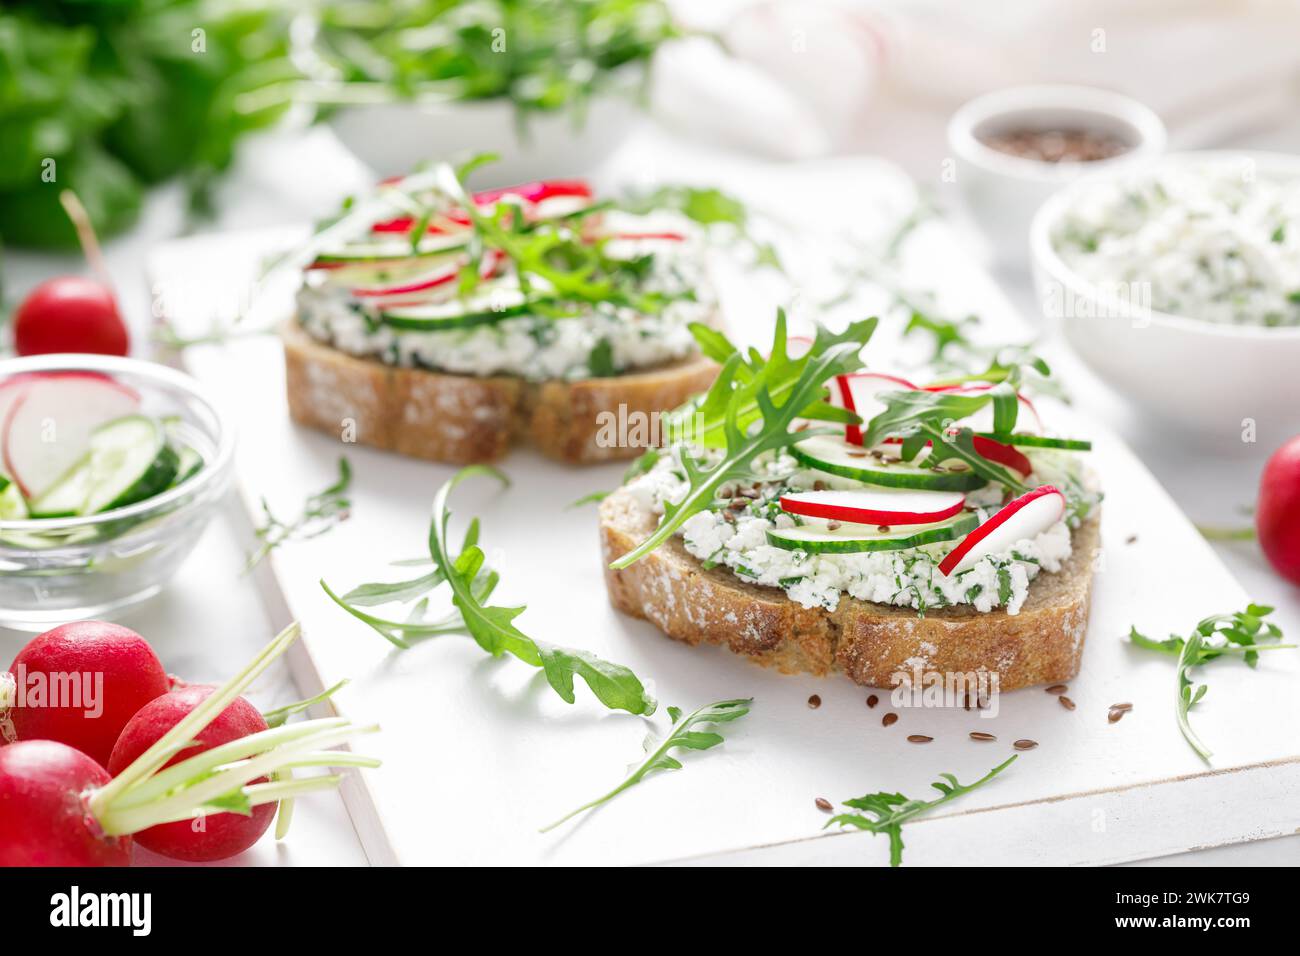 Sandwiches with rye bread toasts, cottage cheese, radish, cucumber, fresh greens and arugula for a healthy breakfast Stock Photo